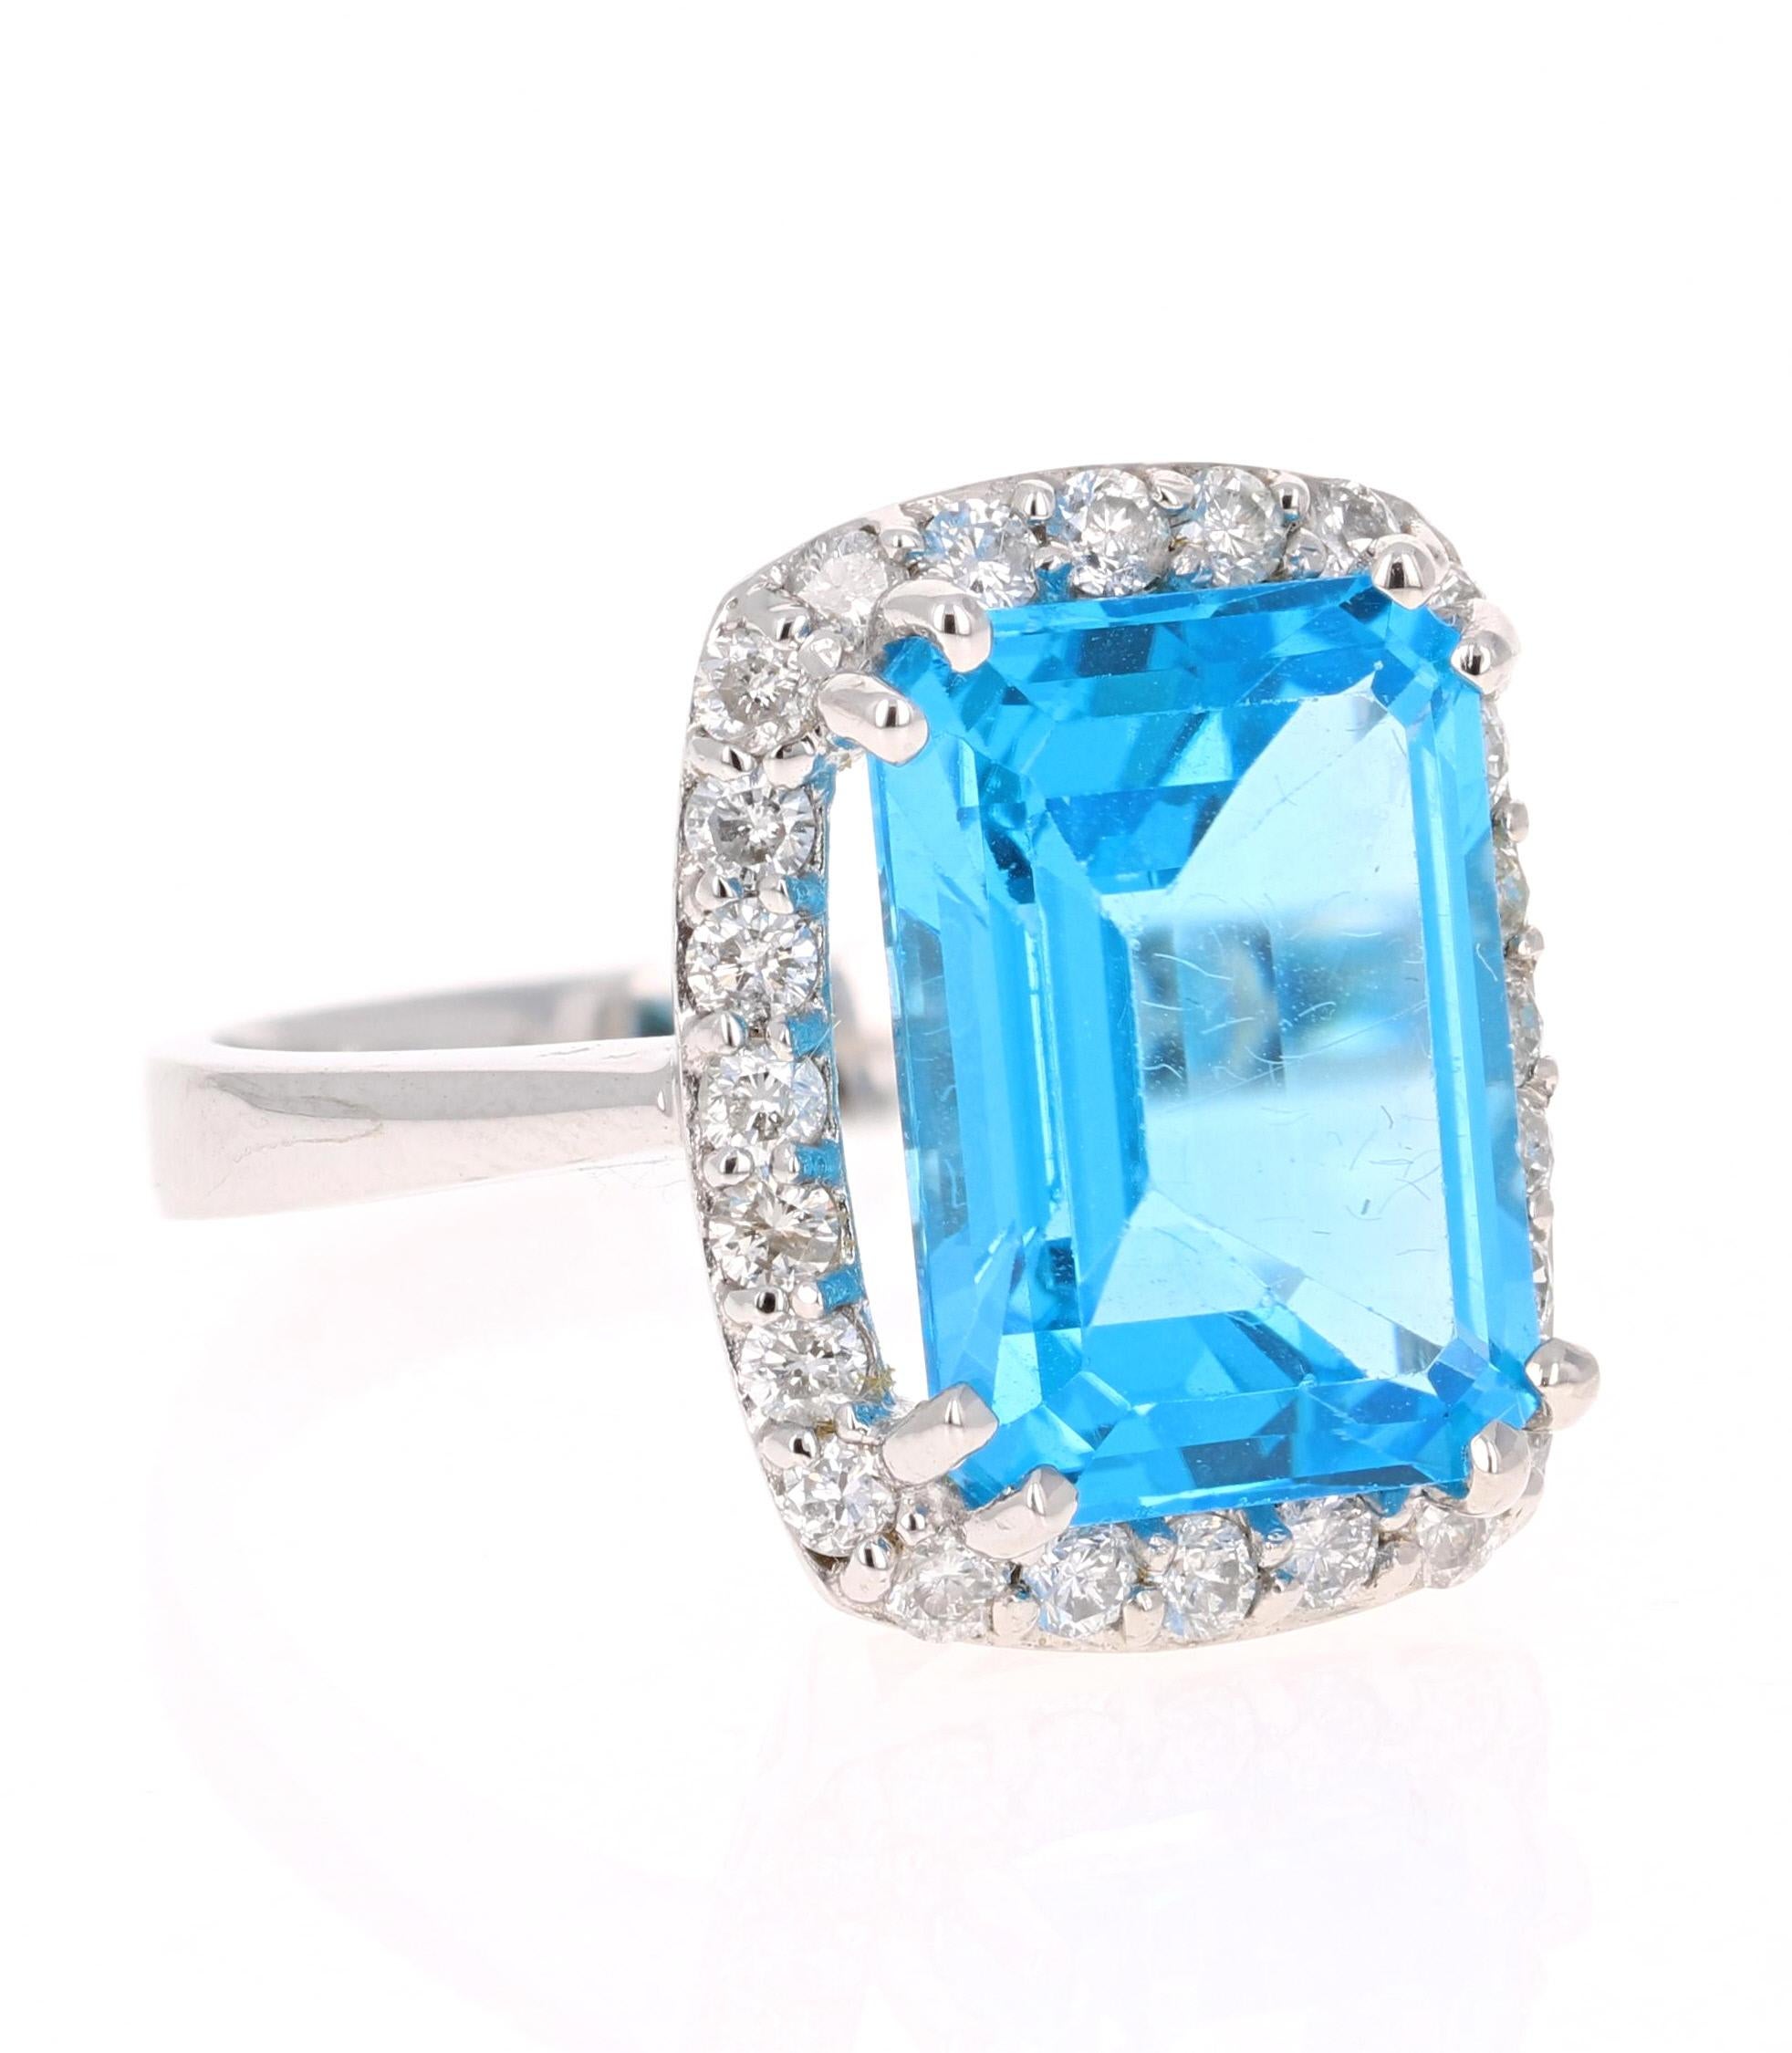 This beautiful Emerald cut Blue Topaz and Diamond ring has a stunningly large Blue Topaz that weighs 9.14 Carats. It is surrounded by 24 Round Cut Diamonds that weigh 0.74 Carats. The total carat weight of the ring is 9.88 Carats.   

The Blue